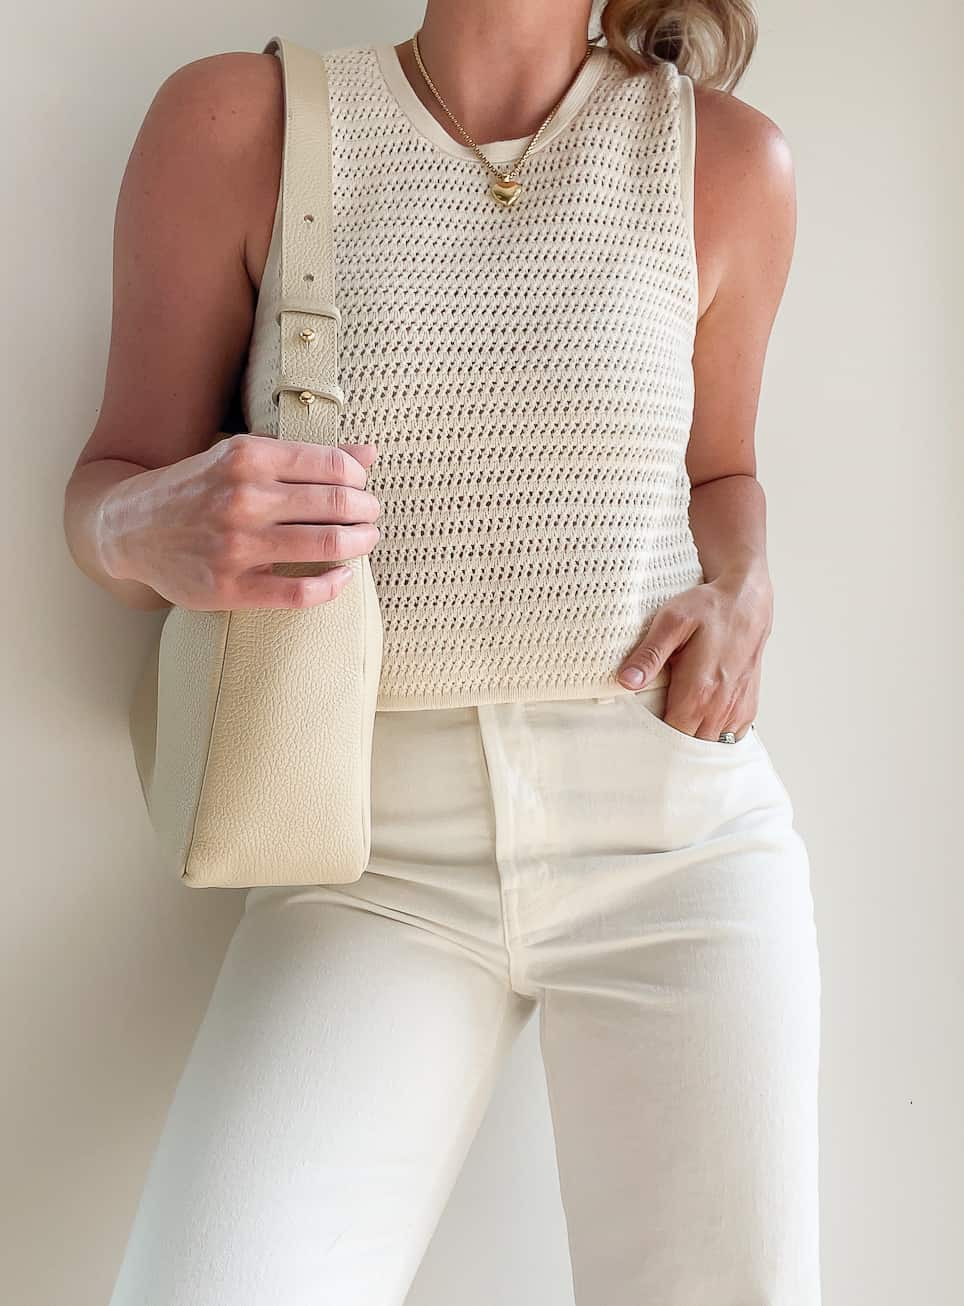 Woman wearing a crochet knit top with white Everlane jeans 